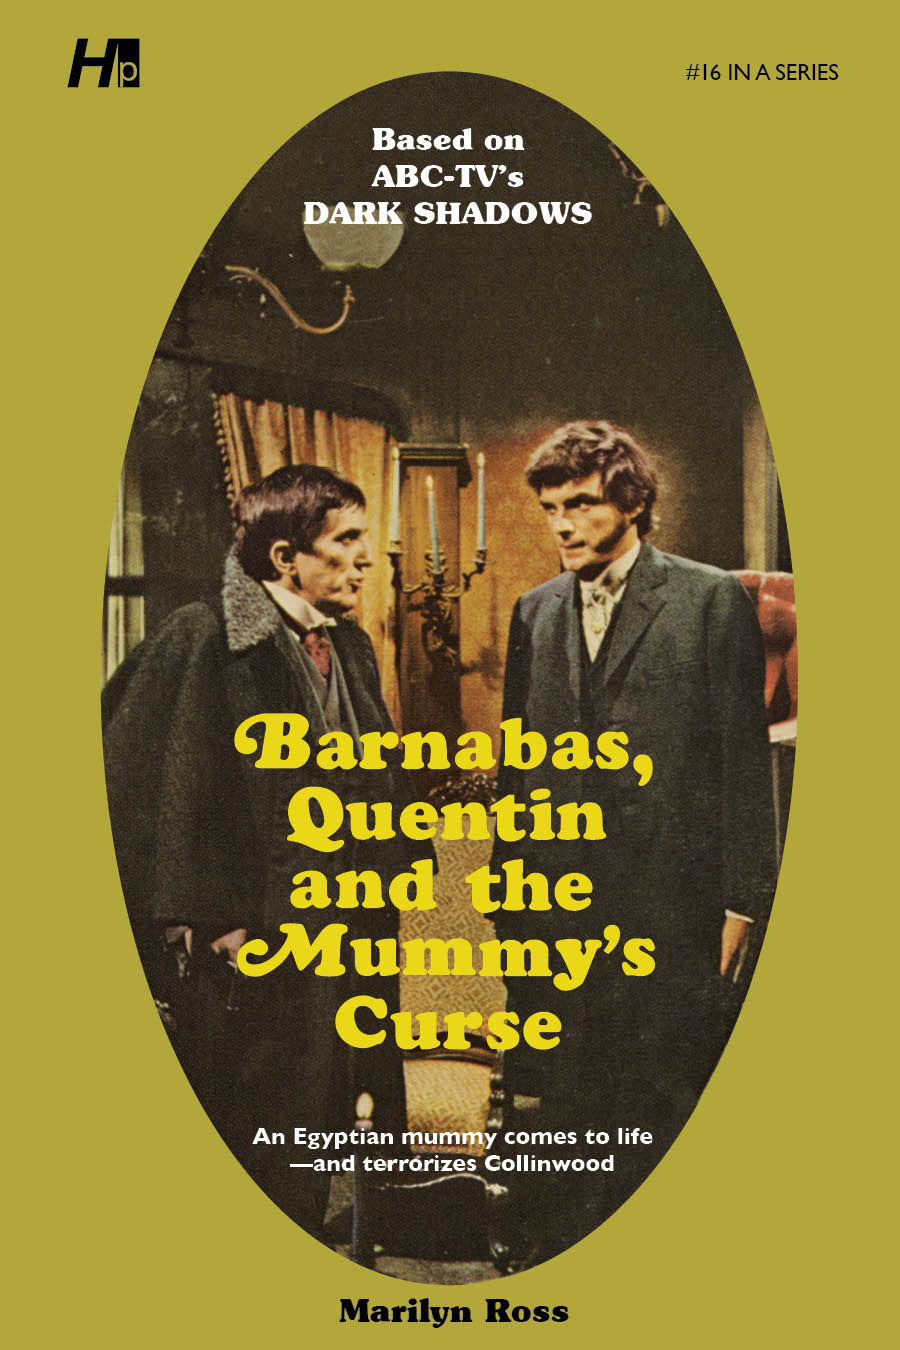 Dark Shadows #16: Barnabas, Quentin and the Mummy's Curse [Paperback]